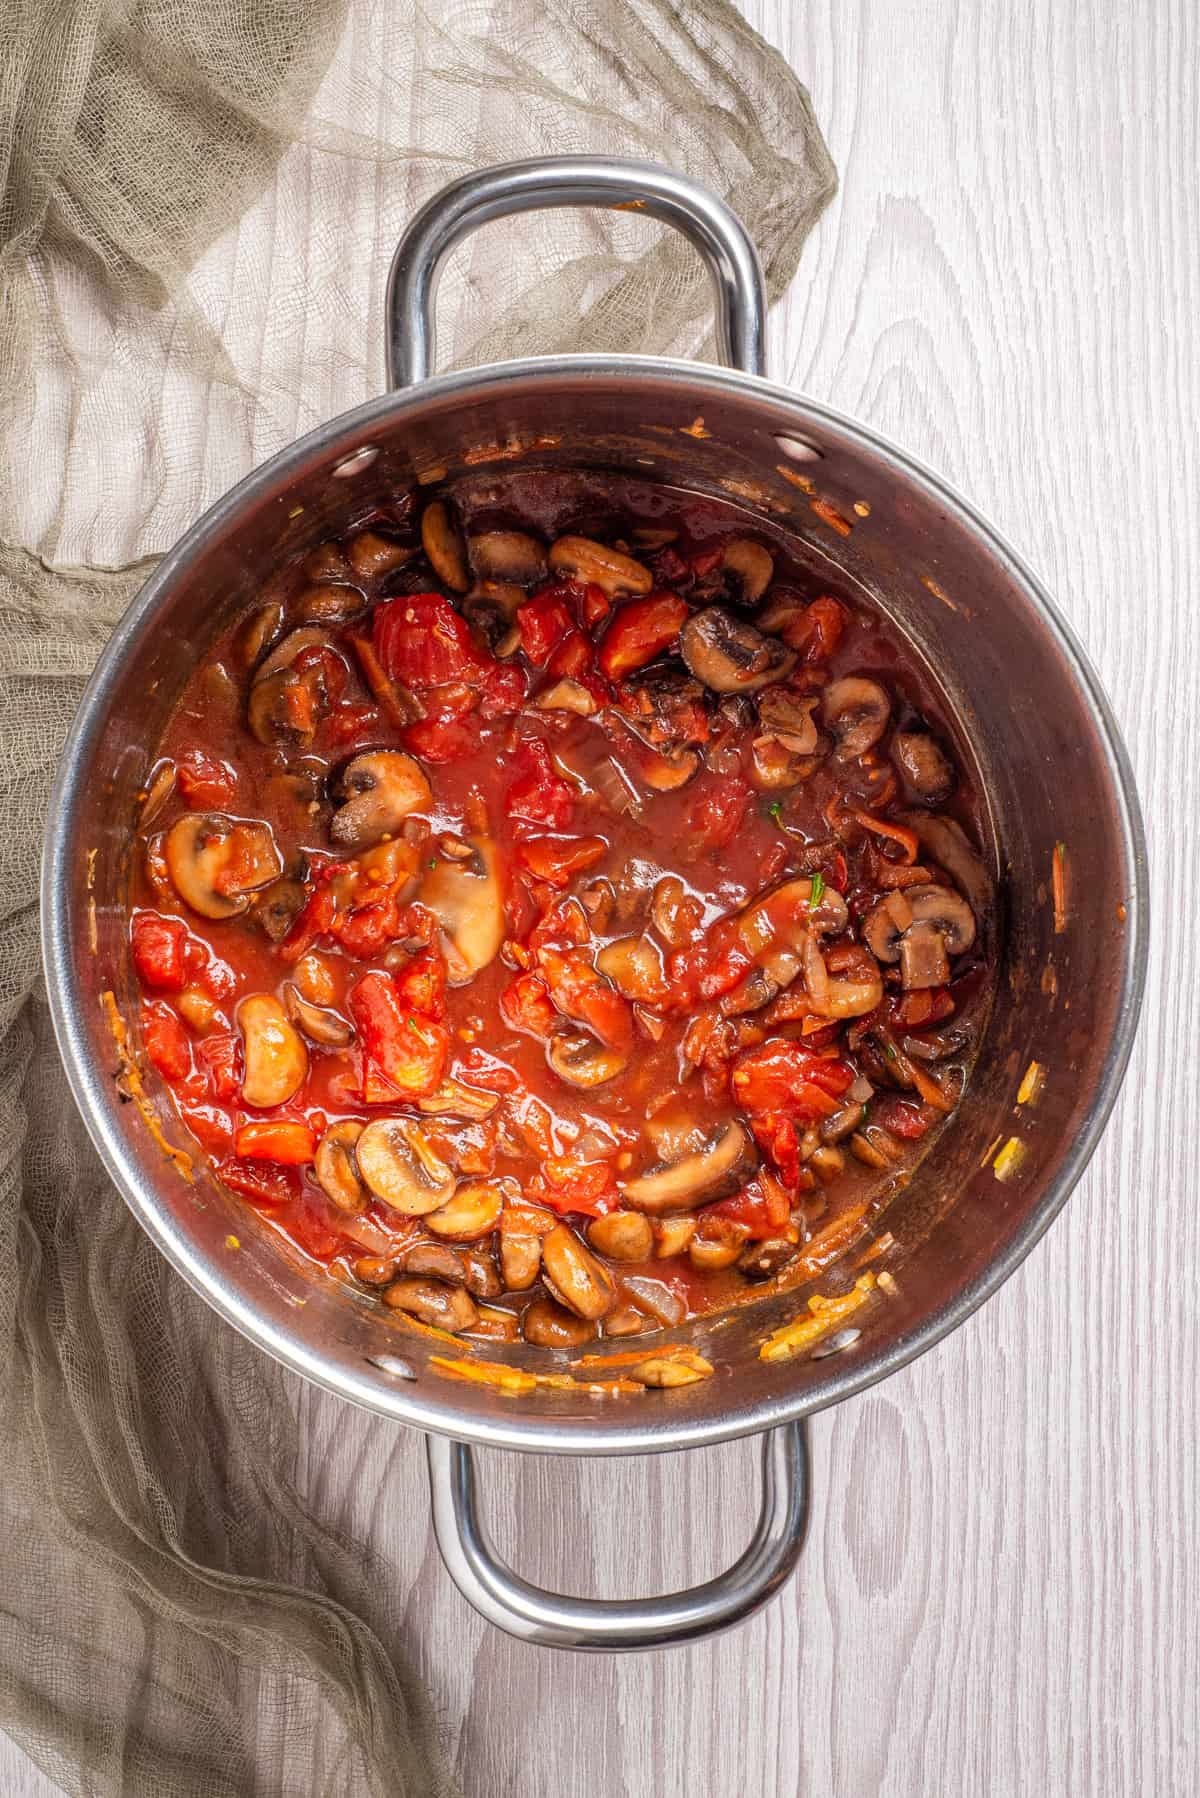 An overhead image of vegan red wine and plum tomatoes being added to the pot of mushroom ragu.